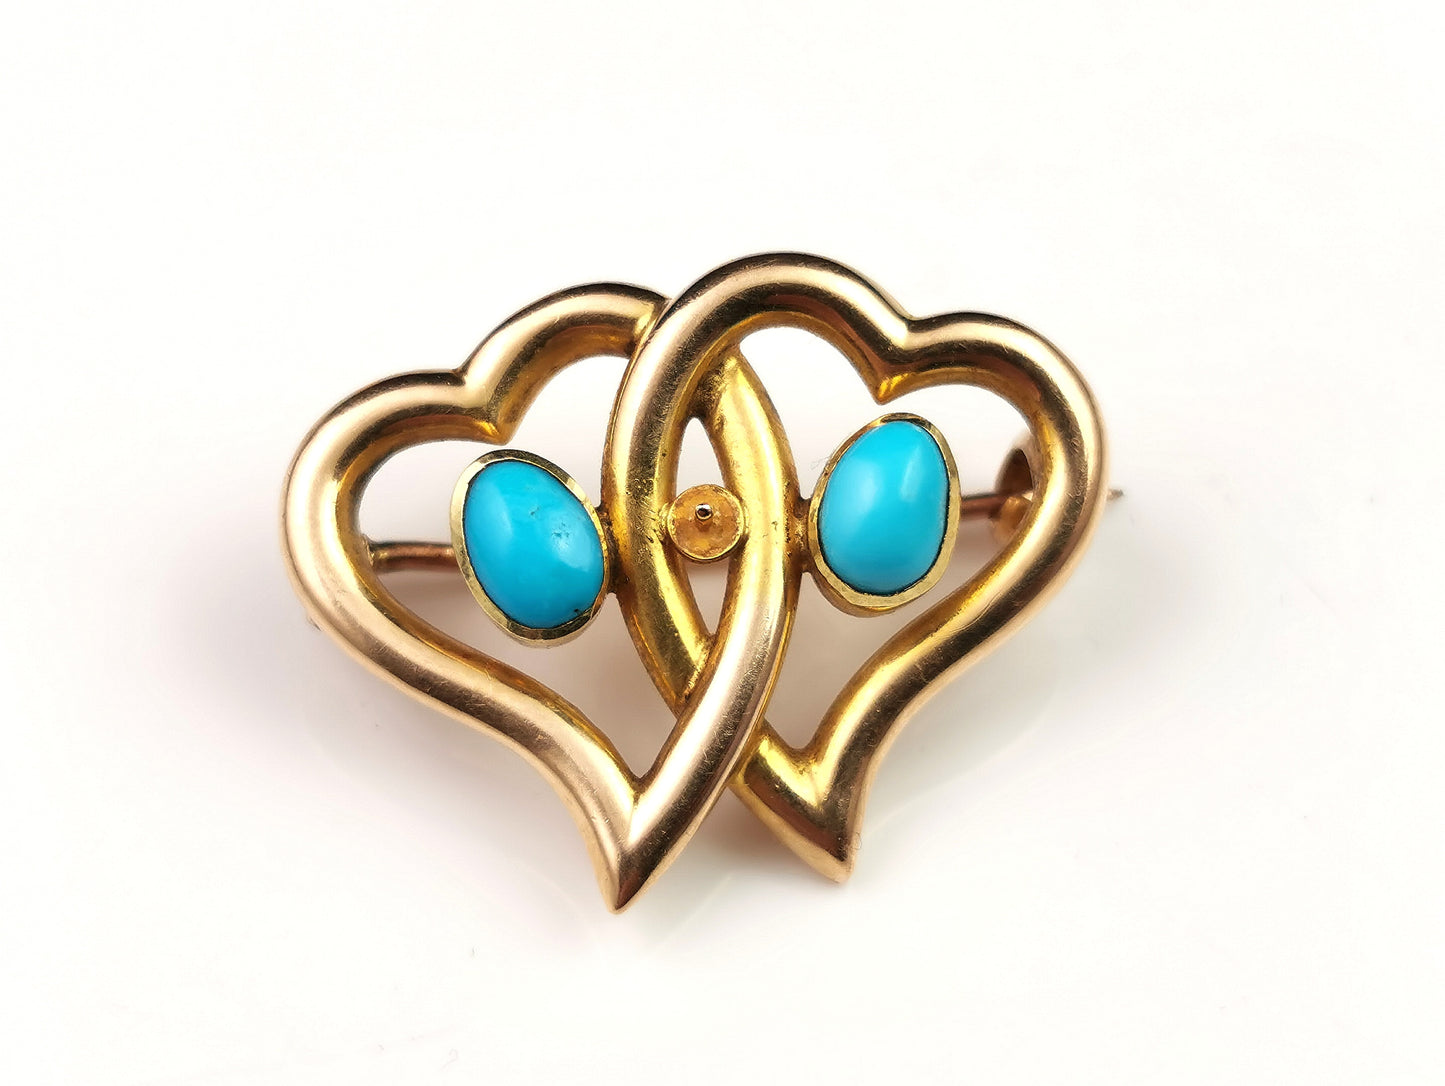 Antique Double Witches heart brooch, 15ct gold, Turquoise